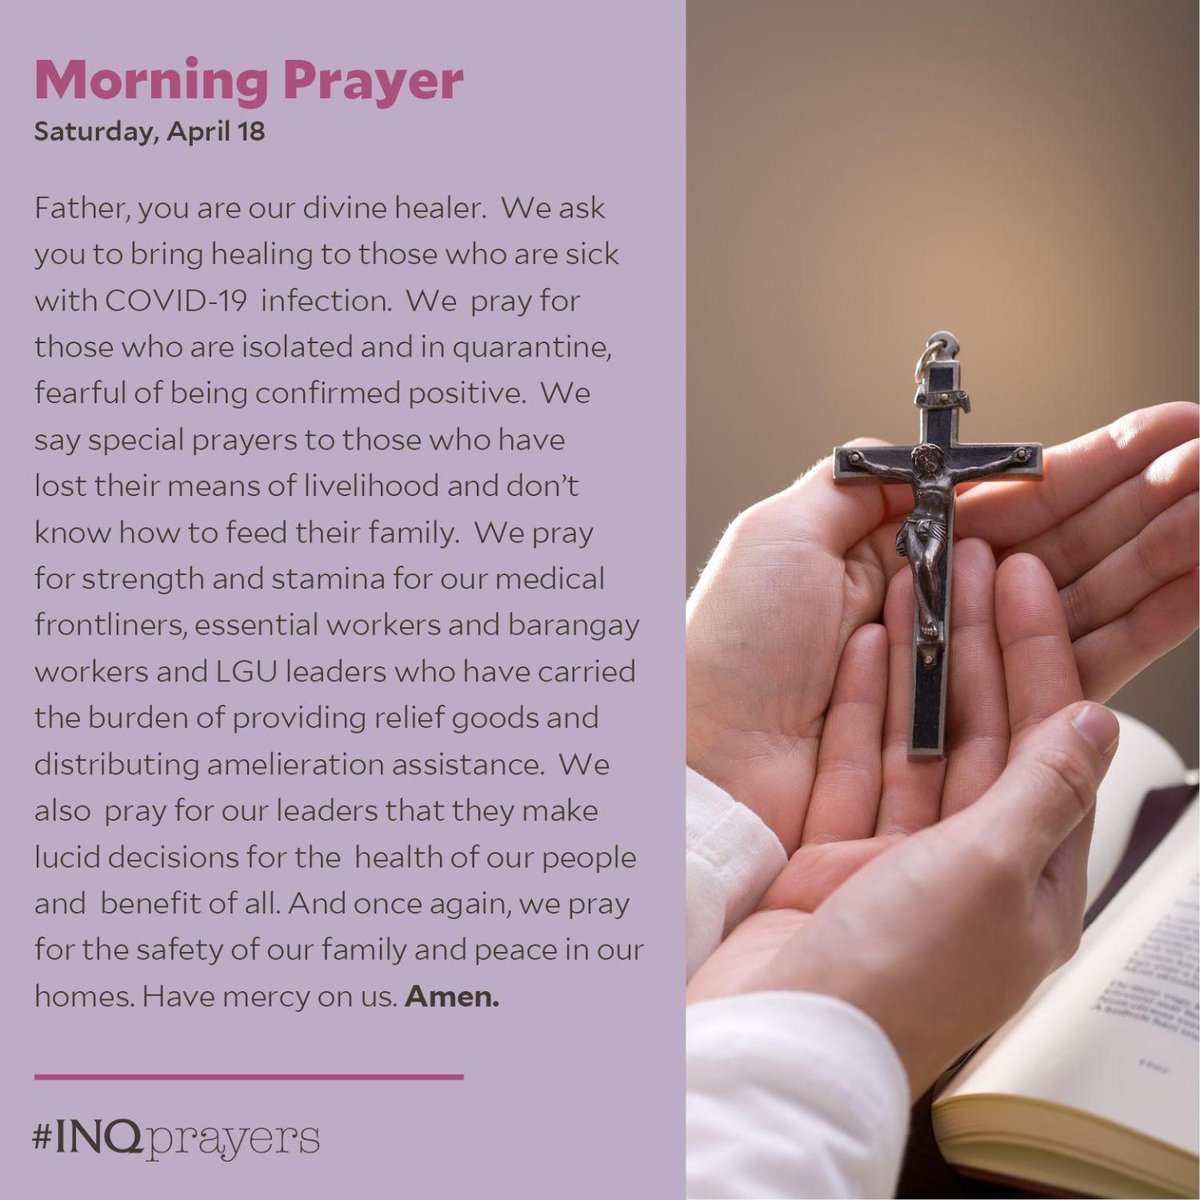 Inquirer Sur Twitter Today S Morning Prayer Inqprayers Father You Are Our Divine Healer We Pray For Our Leaders That They Make Lucid Decisions For The Health Of Our People And Benefit